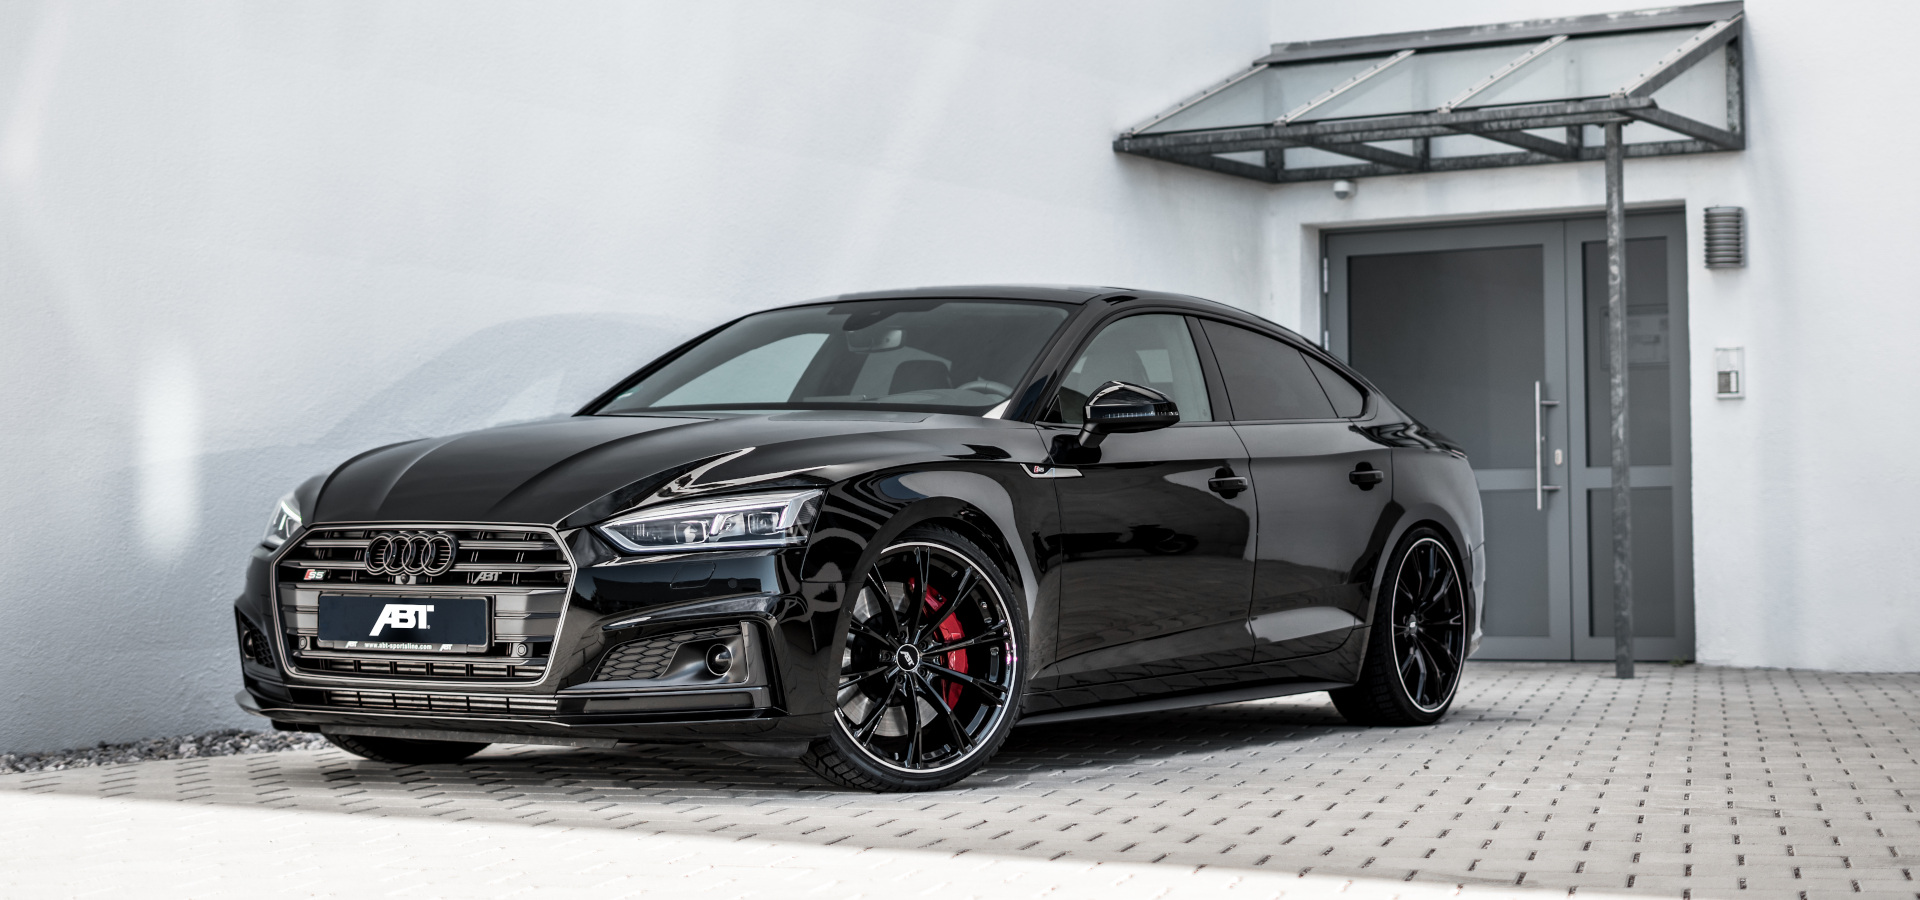 AUDI A5 SPORTBACK audi-s5-sportback-3-0-tfsi-quattro-abt-tuning-435-ps Used  - the parking